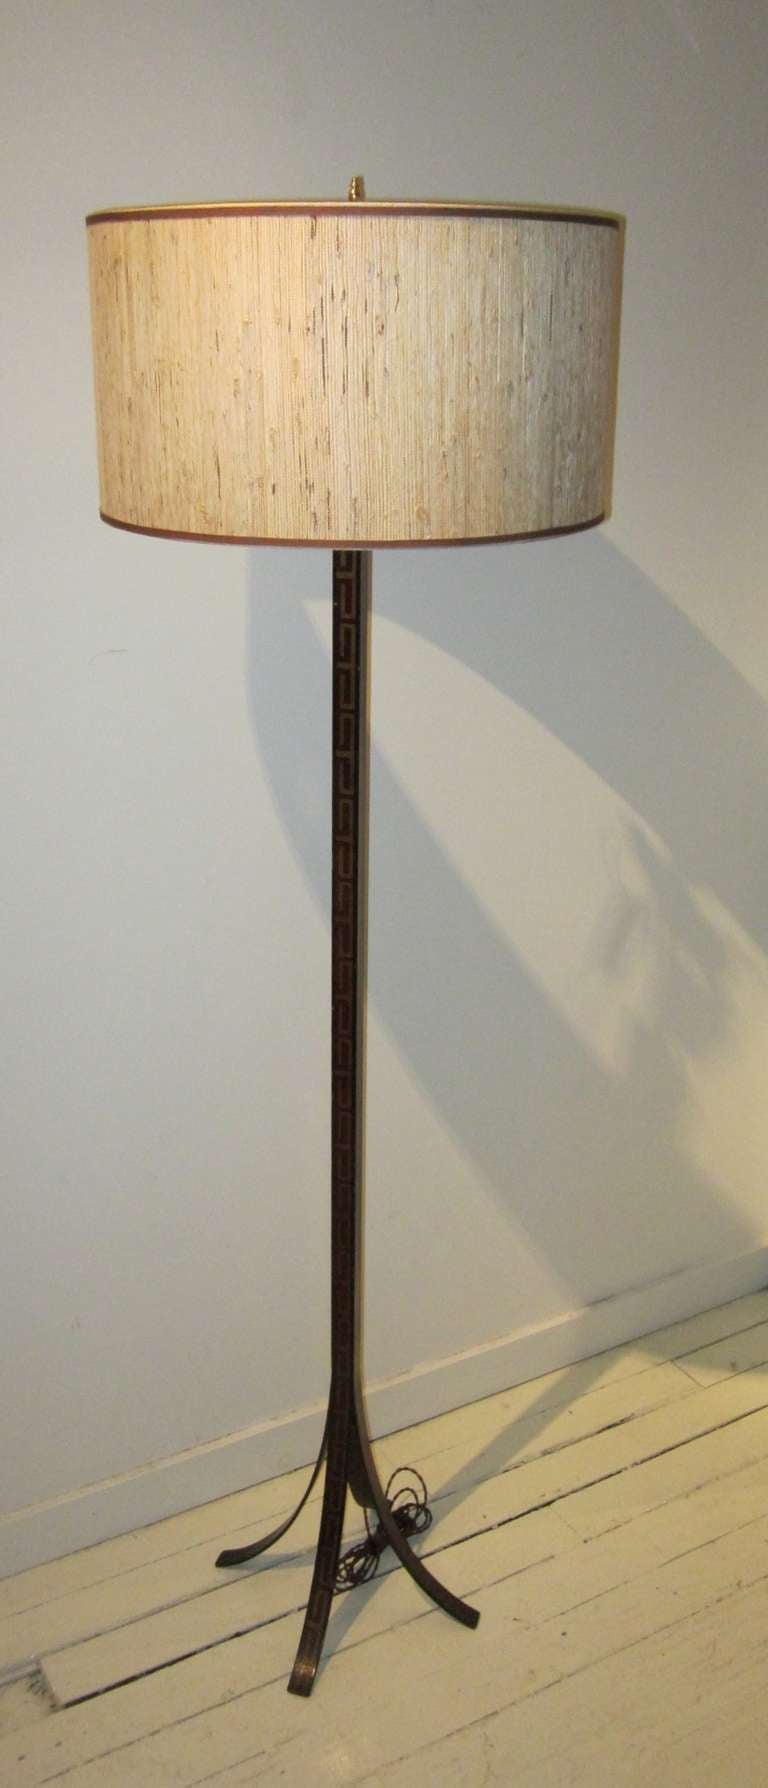 1960's Spanish designer Pierre Lottier signature iron floor lamp with decorative greek key motif
Newly rewired with new lamp shade
Overall height 67.5